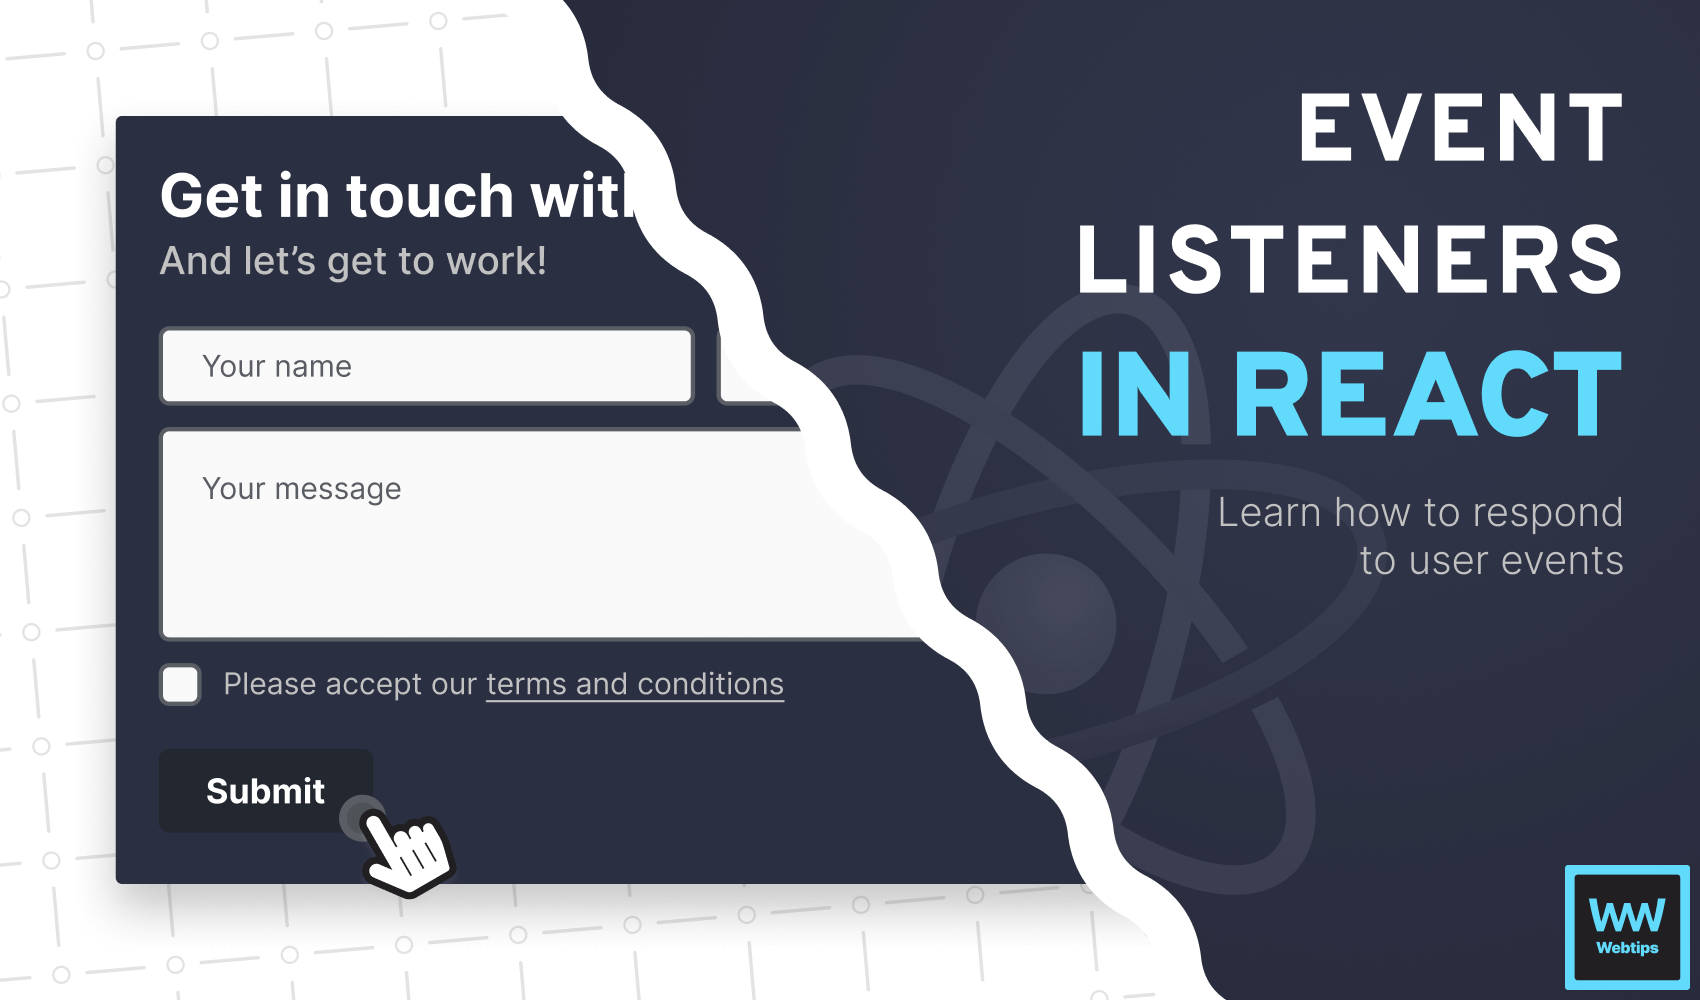 How to Work With Event Listeners in React